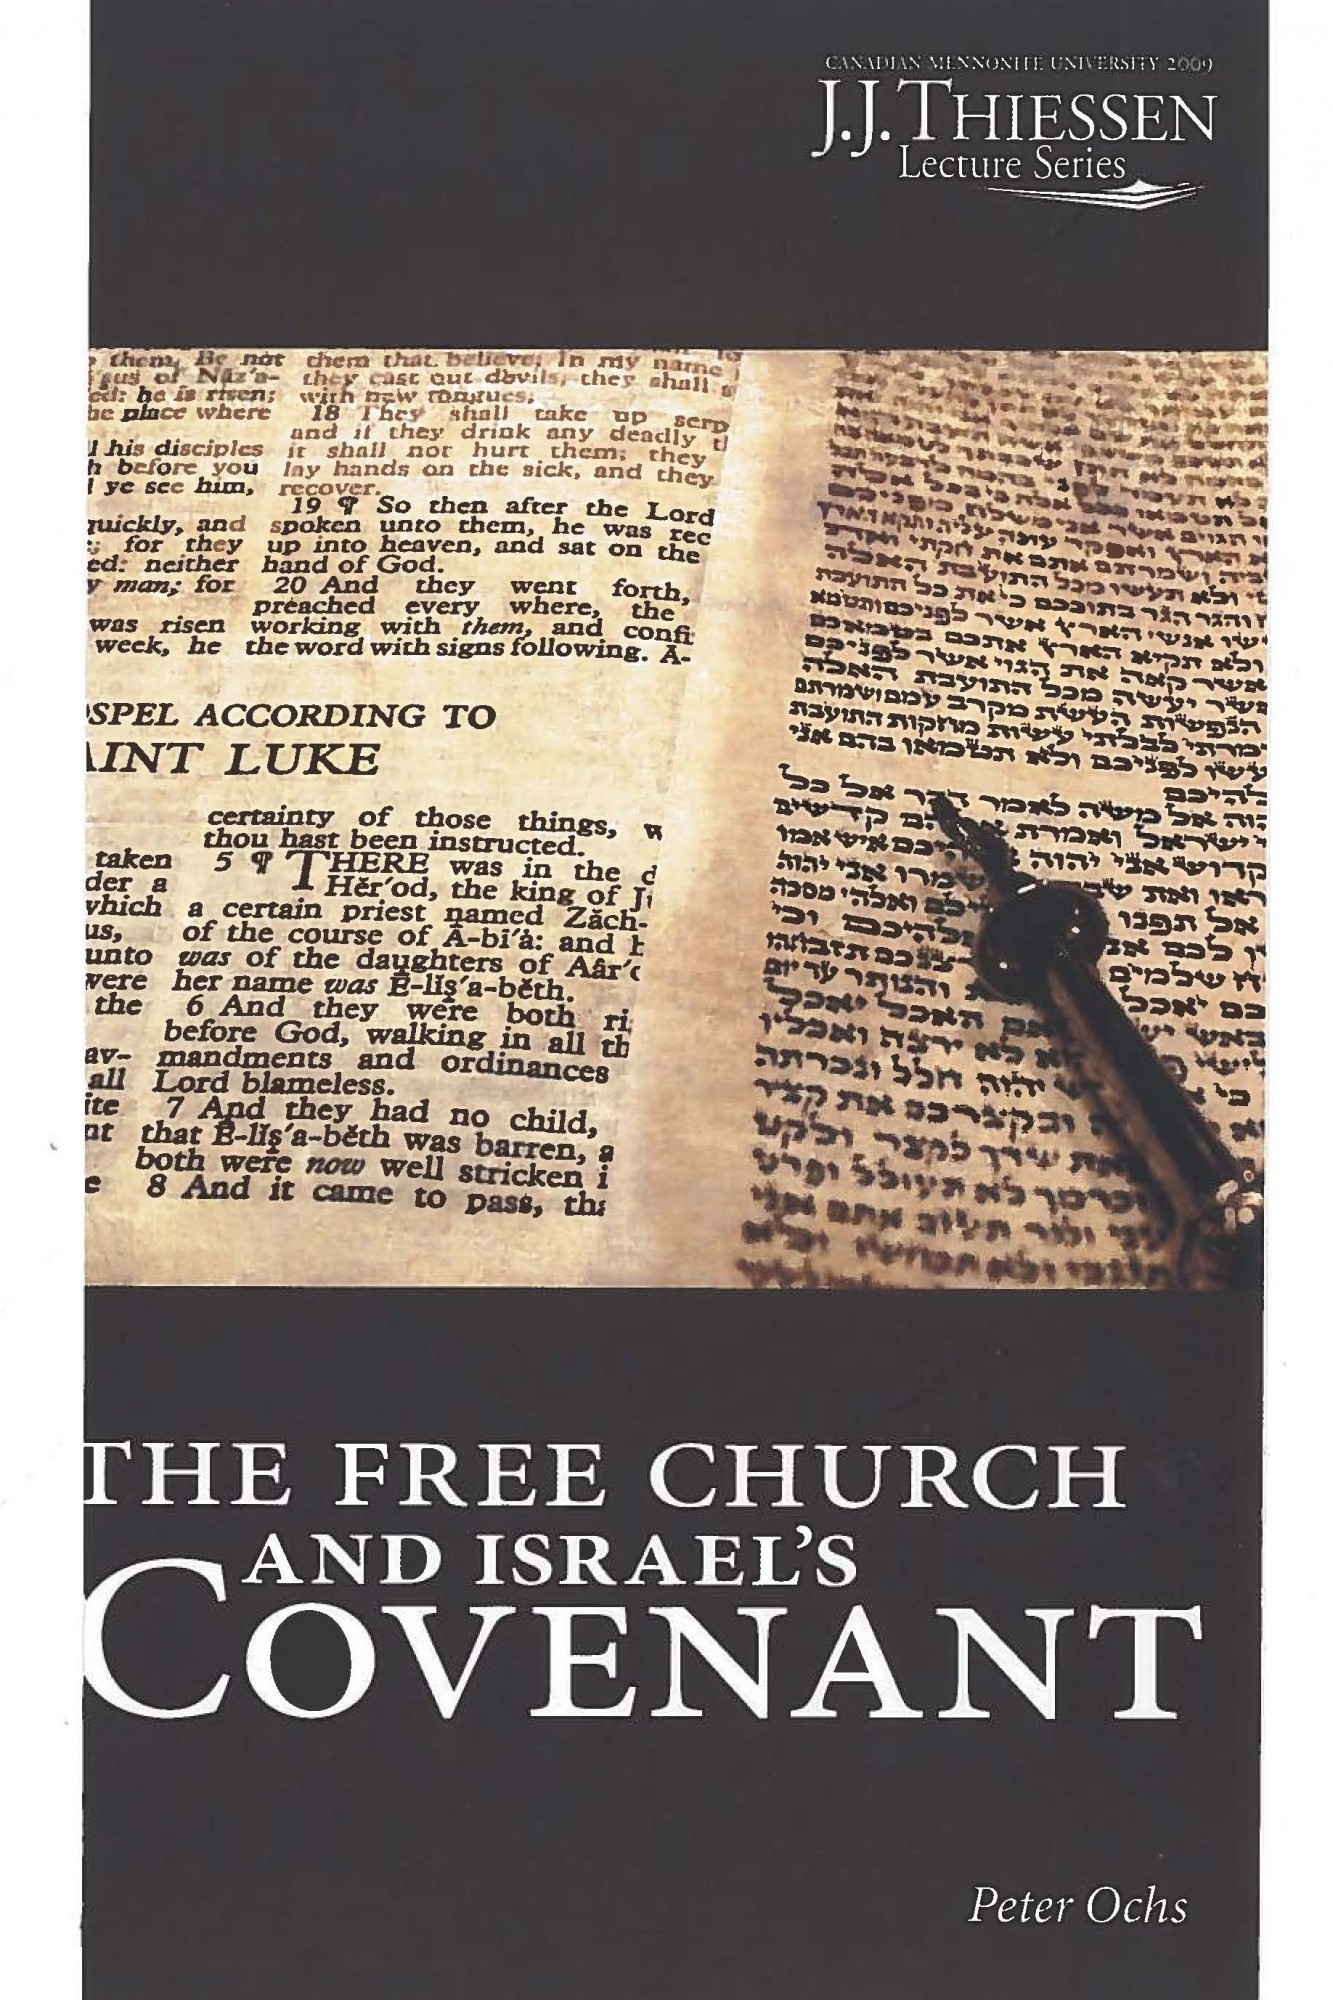 The Free Church and Israel's Covenant